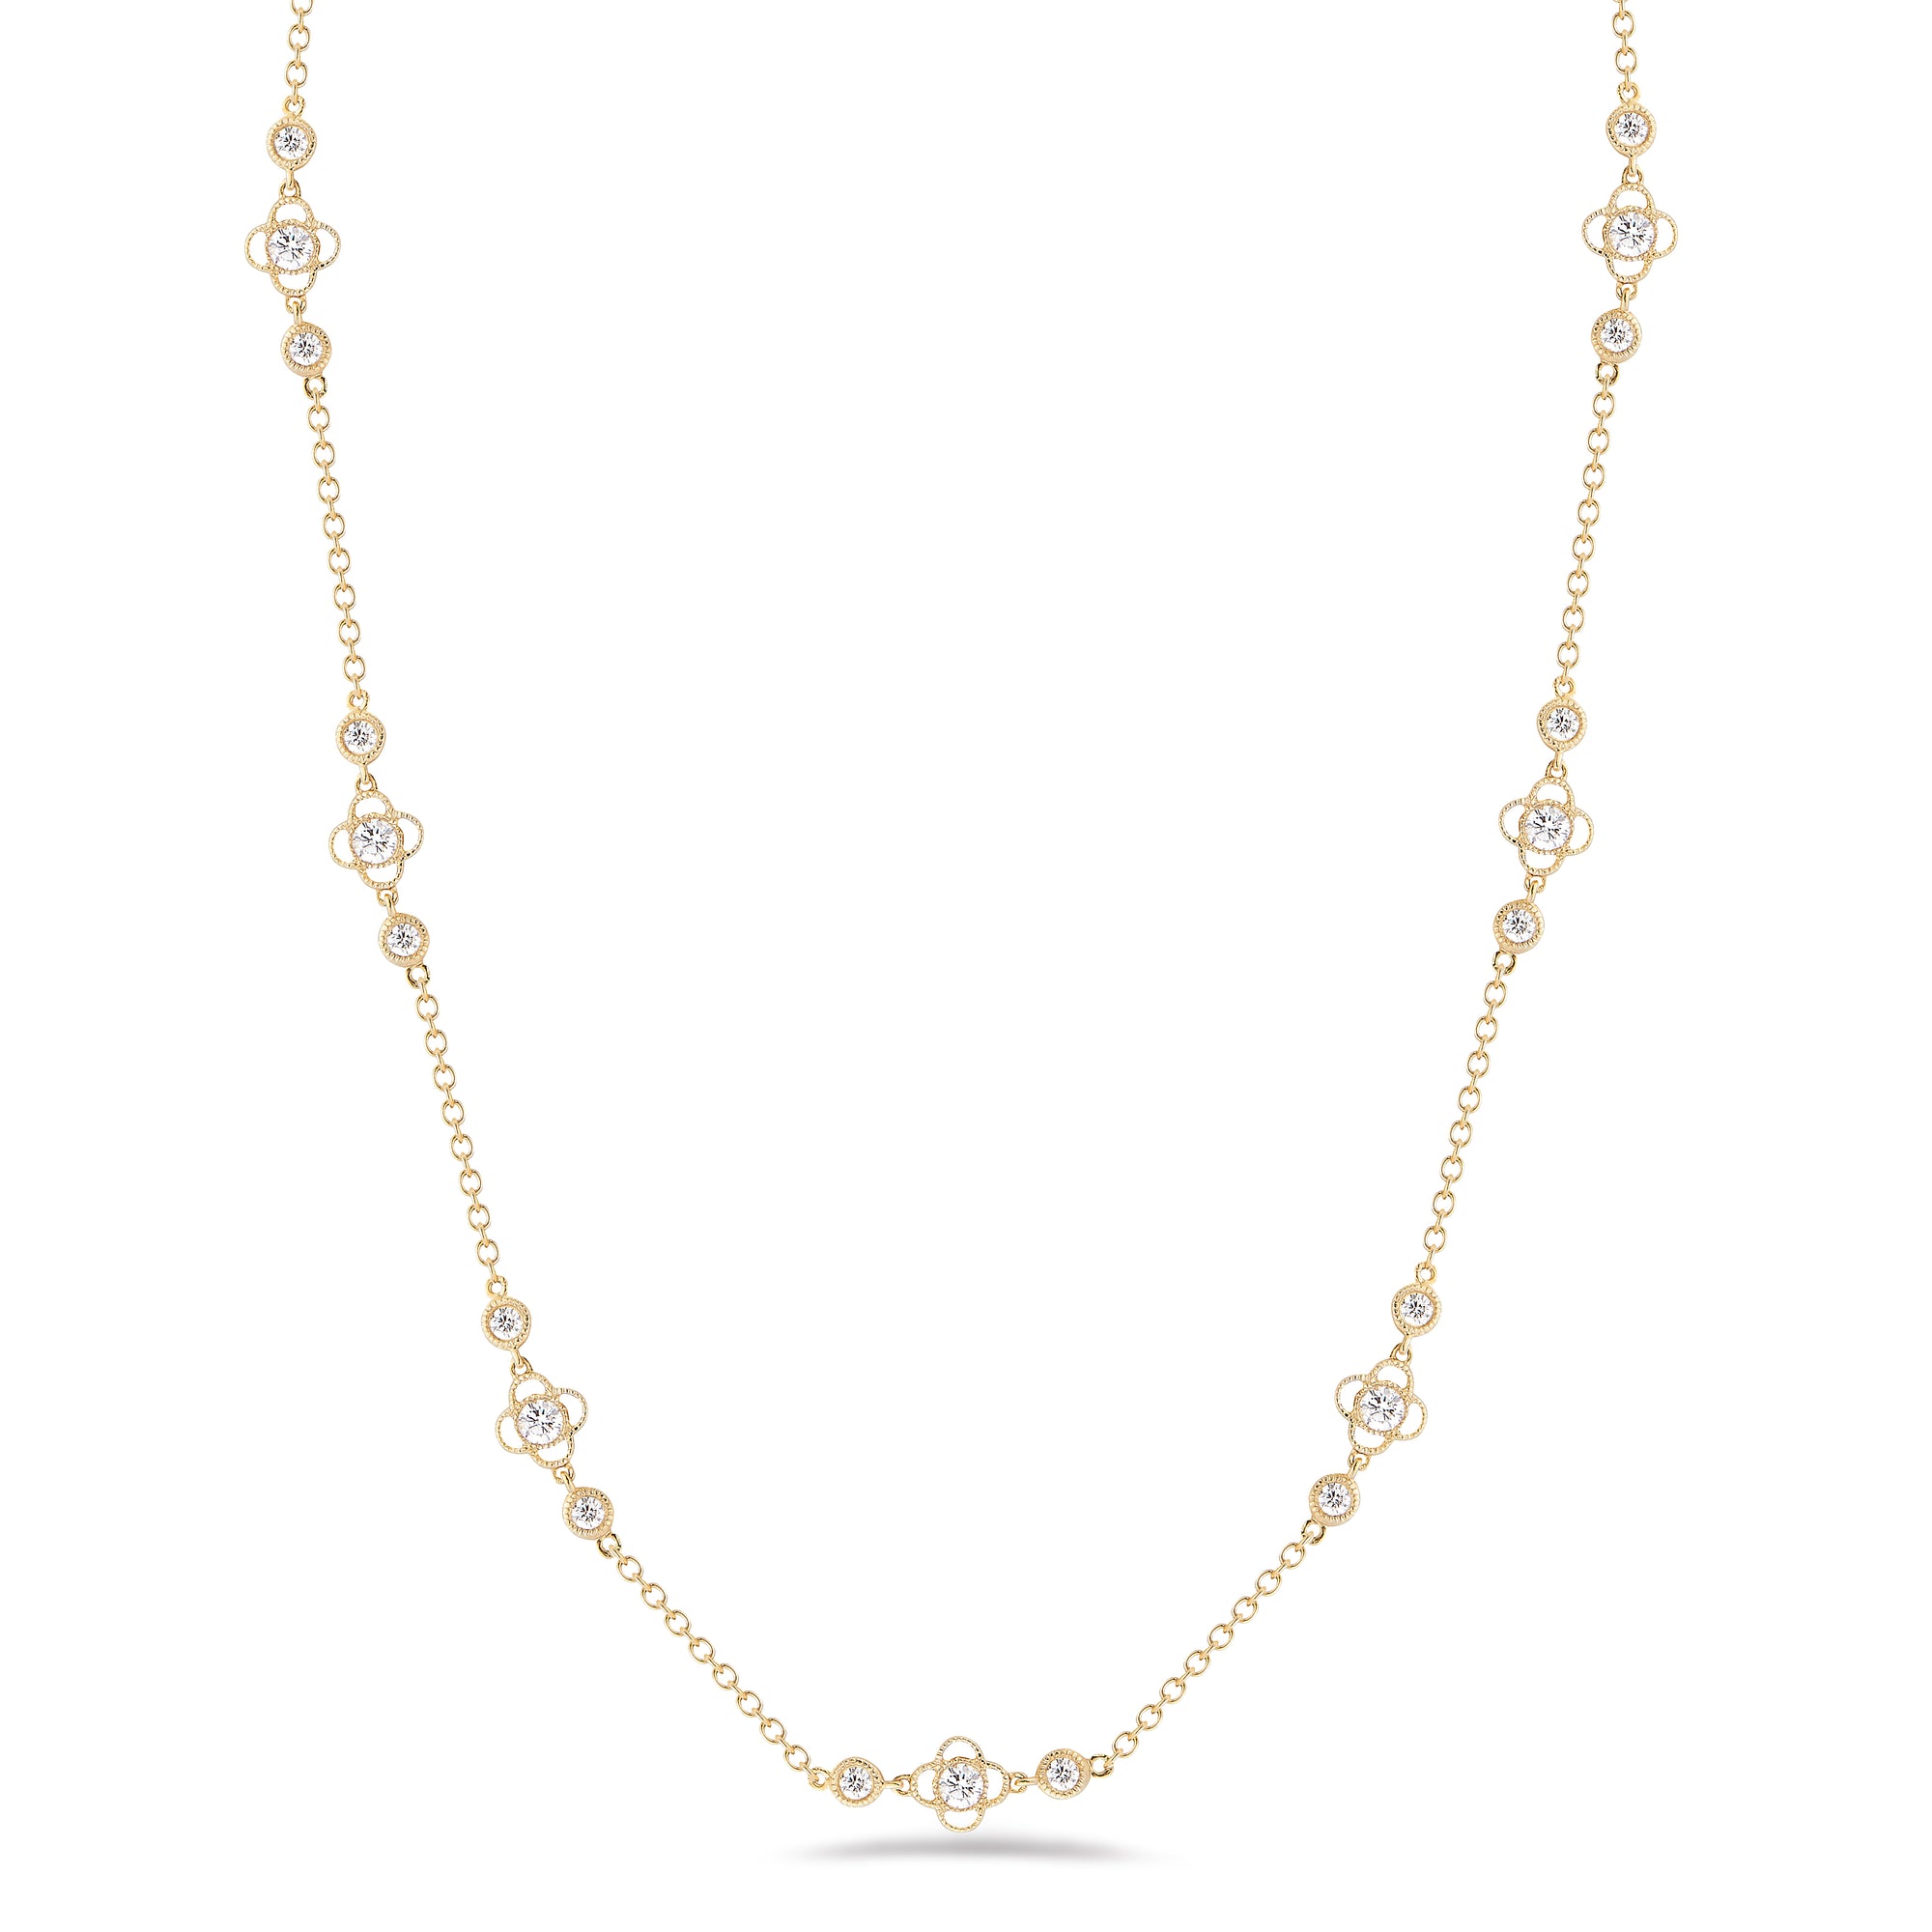 Diamond Bezel Chain Necklace  18k gold, 6.90 grams, 29 round diamonds 1.41 carats.  Available in yellow, white, & rose gold.